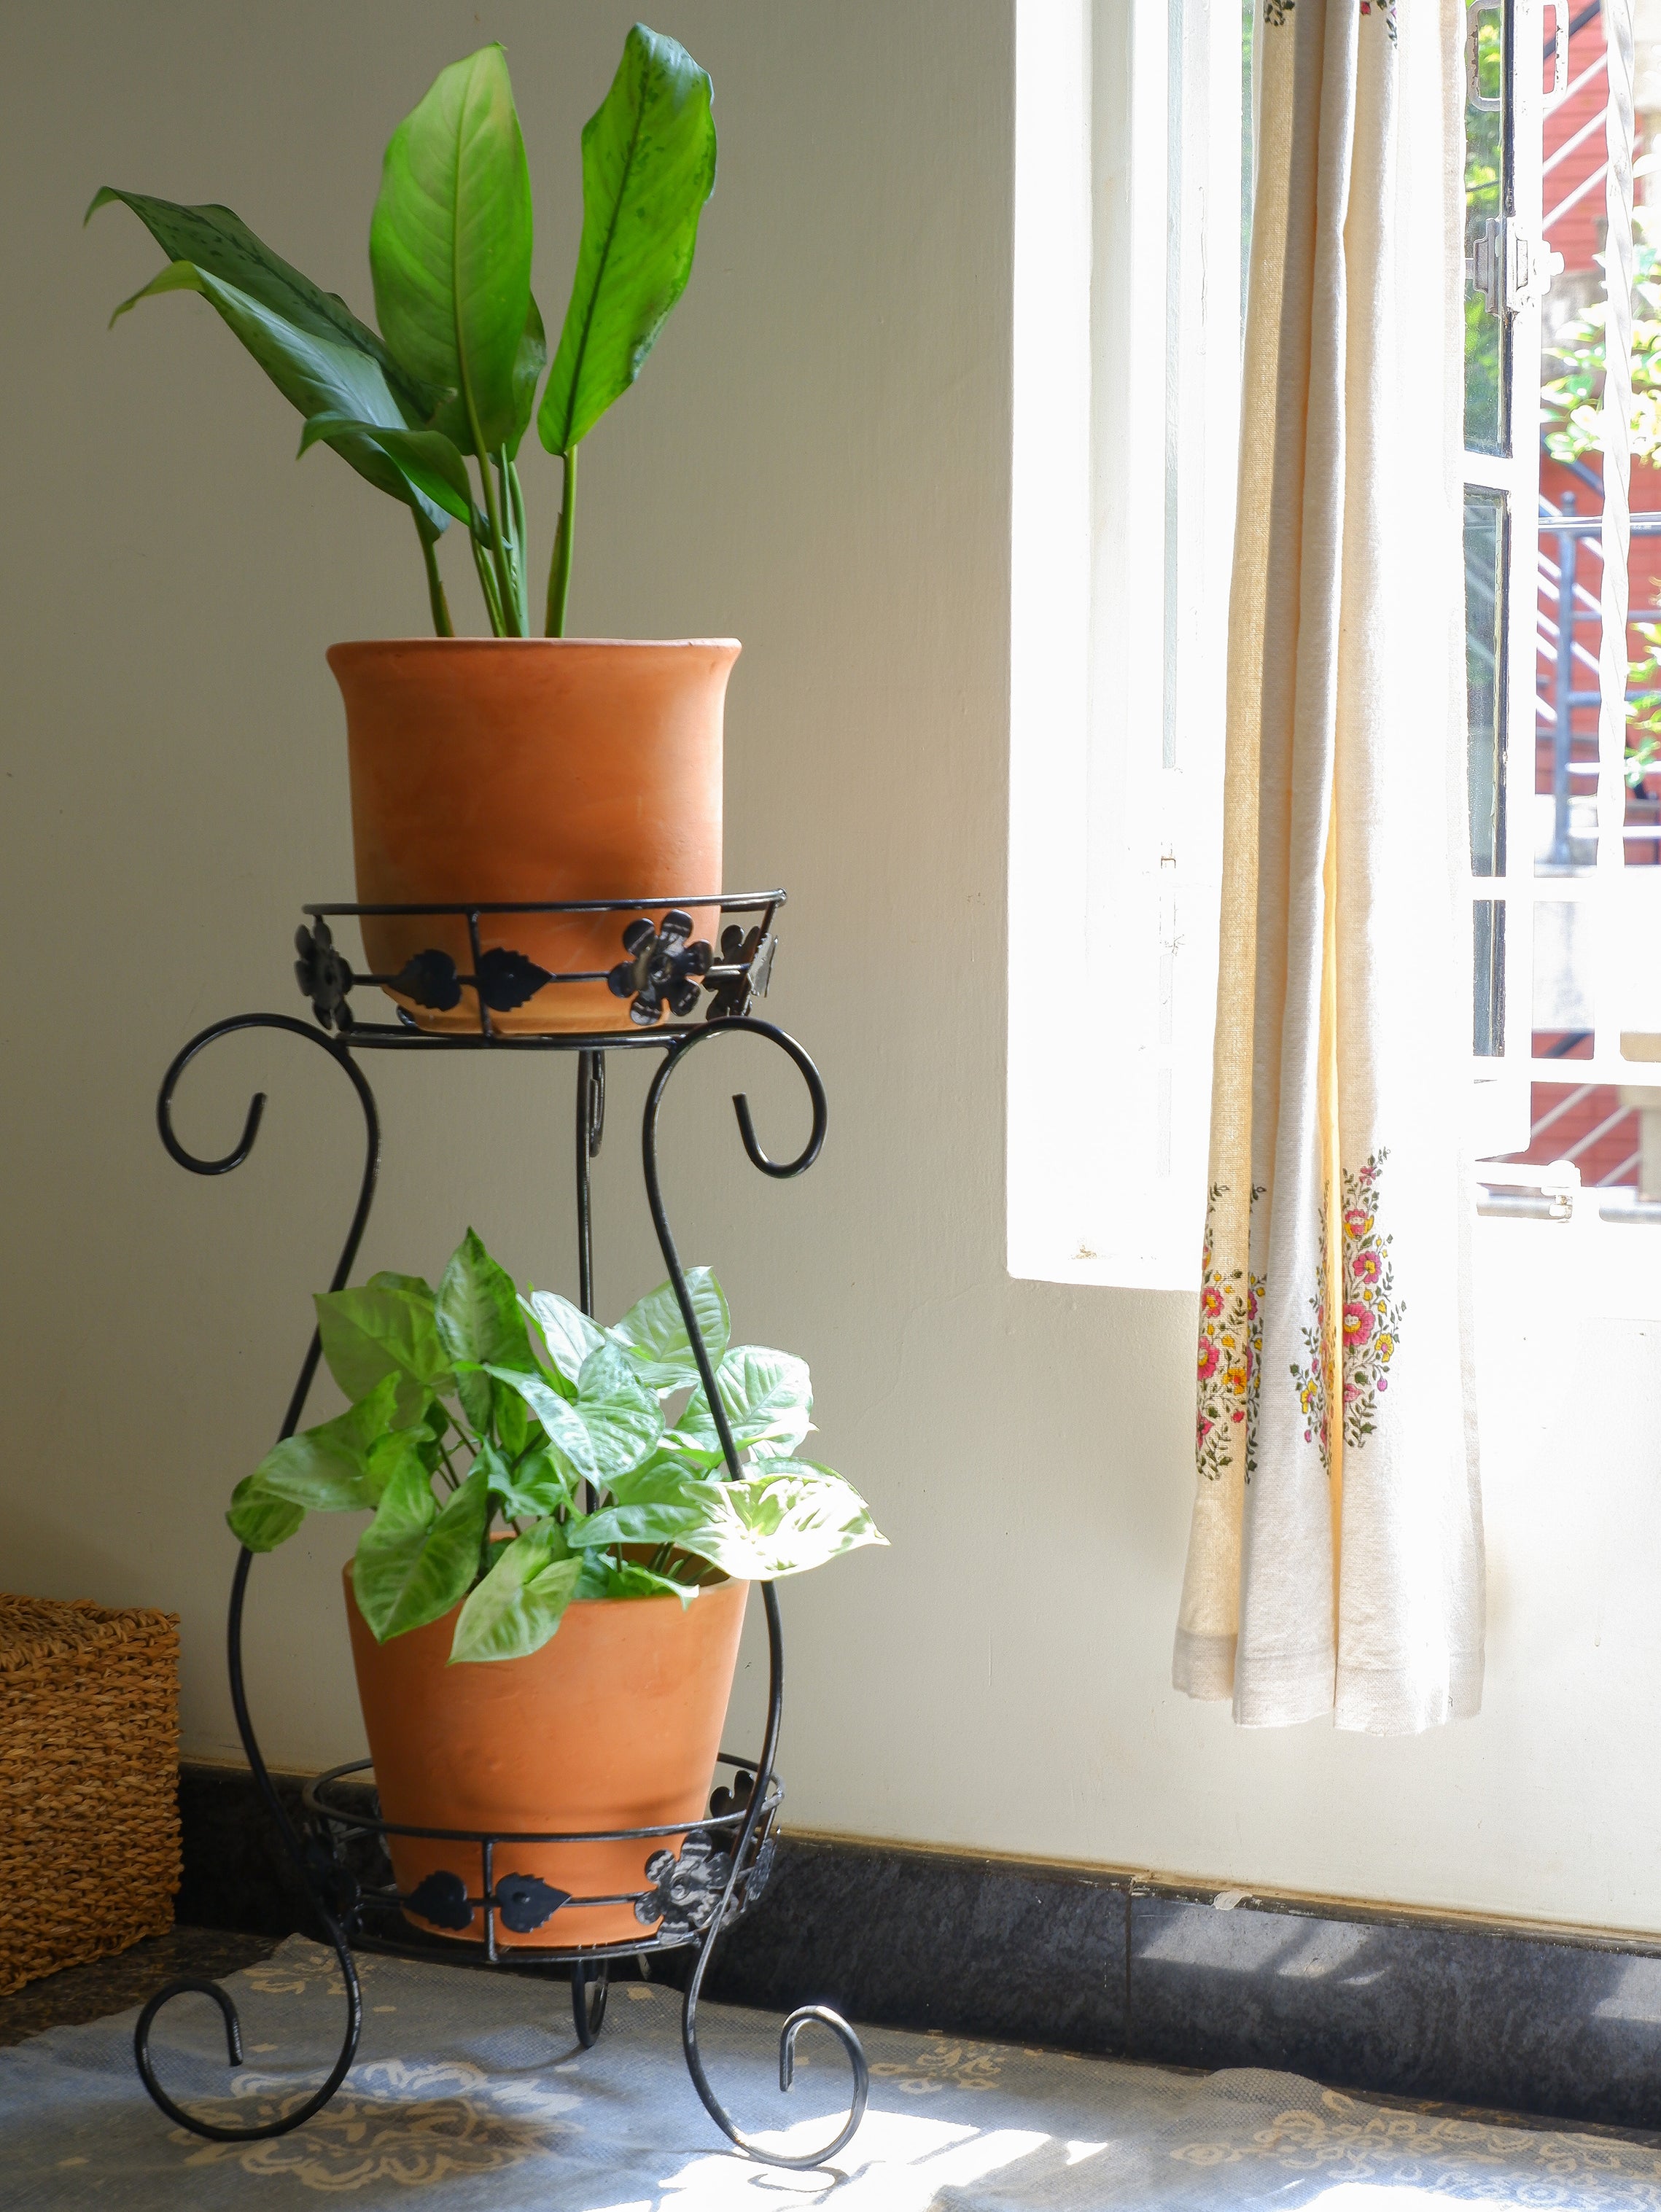 Prakrti garden boutique is an online plant store selling ceramic terracotta pots and décor for indoor plants that are delivered all India